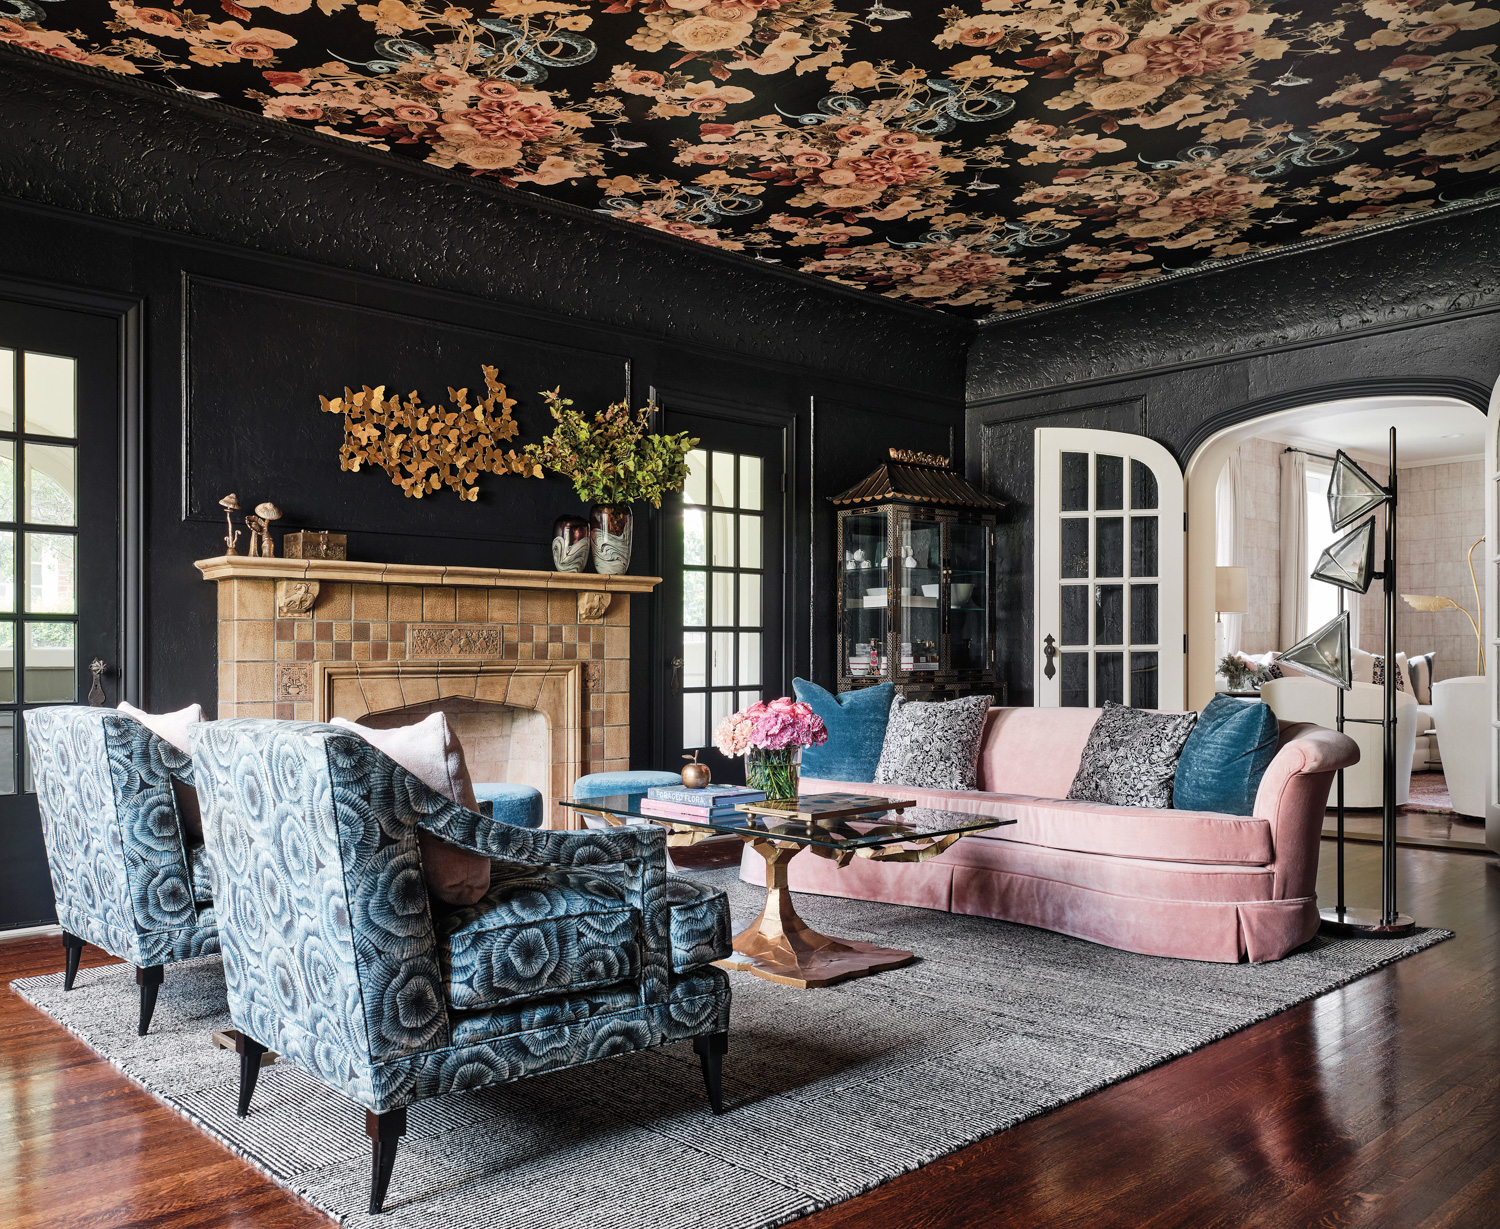 Traci Connell places a blush-velvet settee, blue armchairs, and a wallpapered ceiling in living room